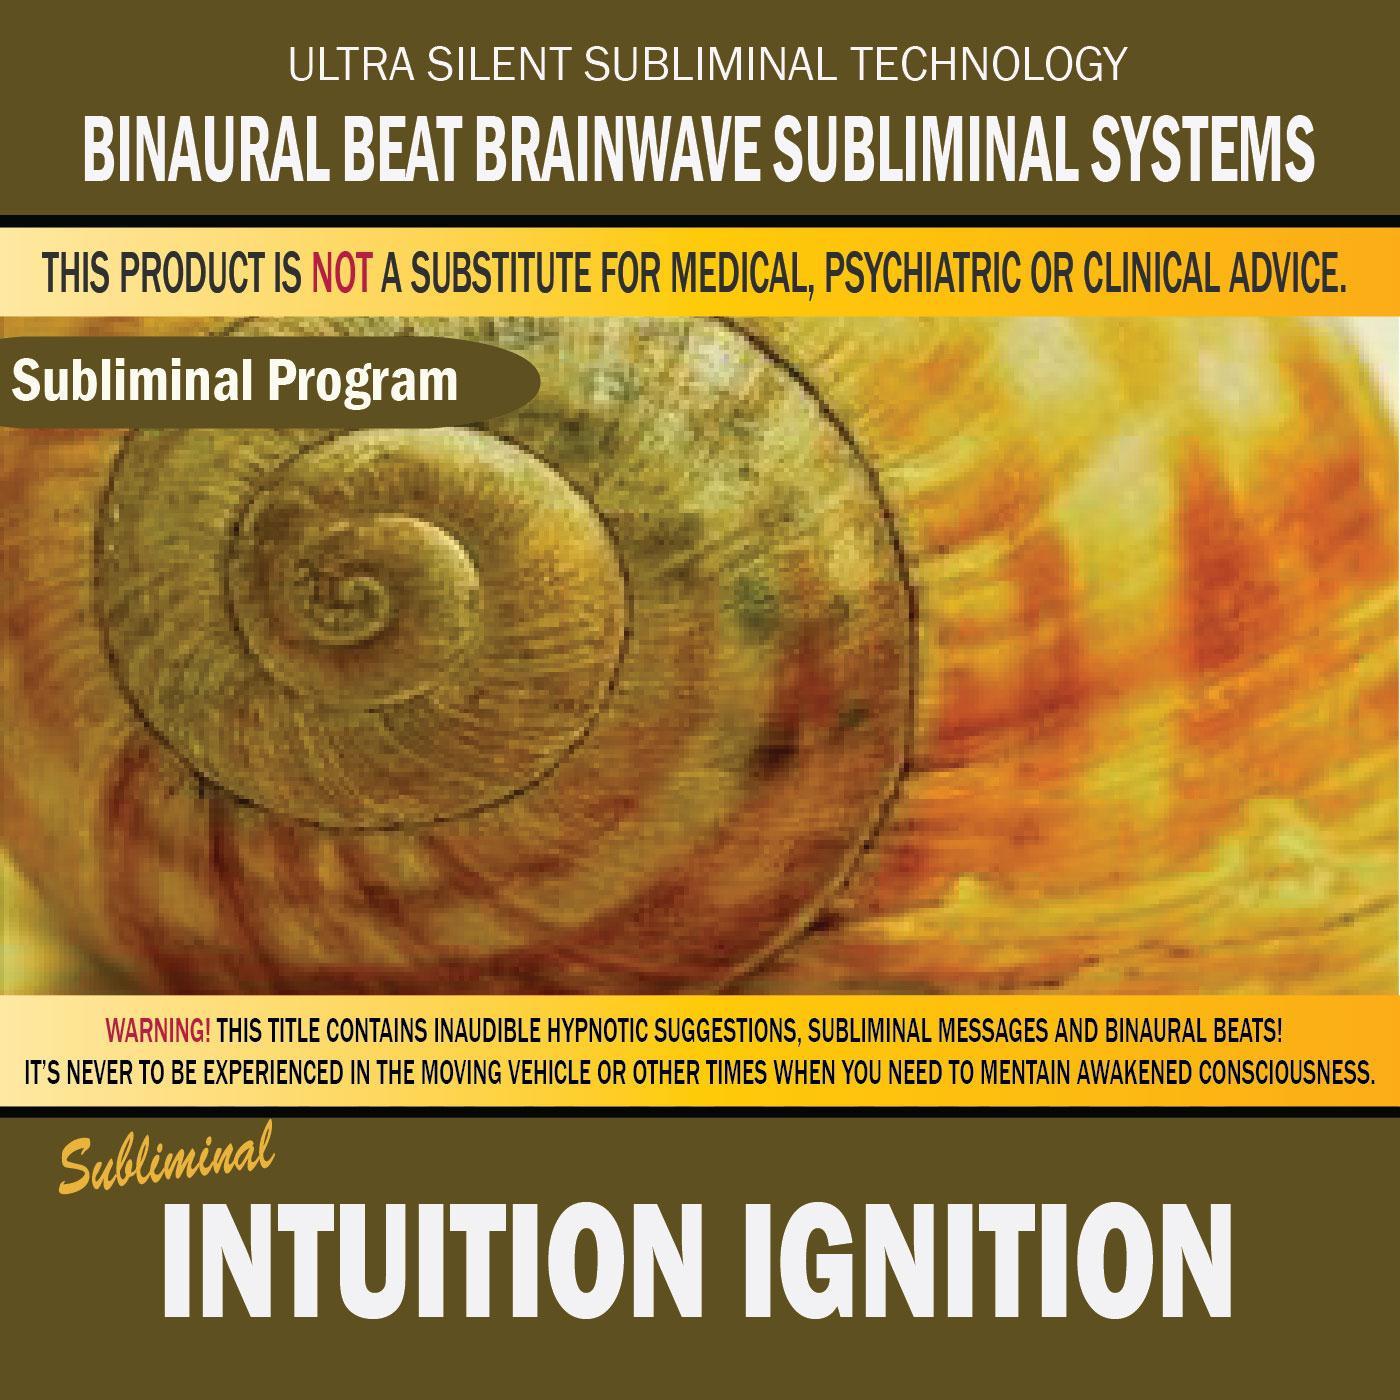 Intuition Ignition